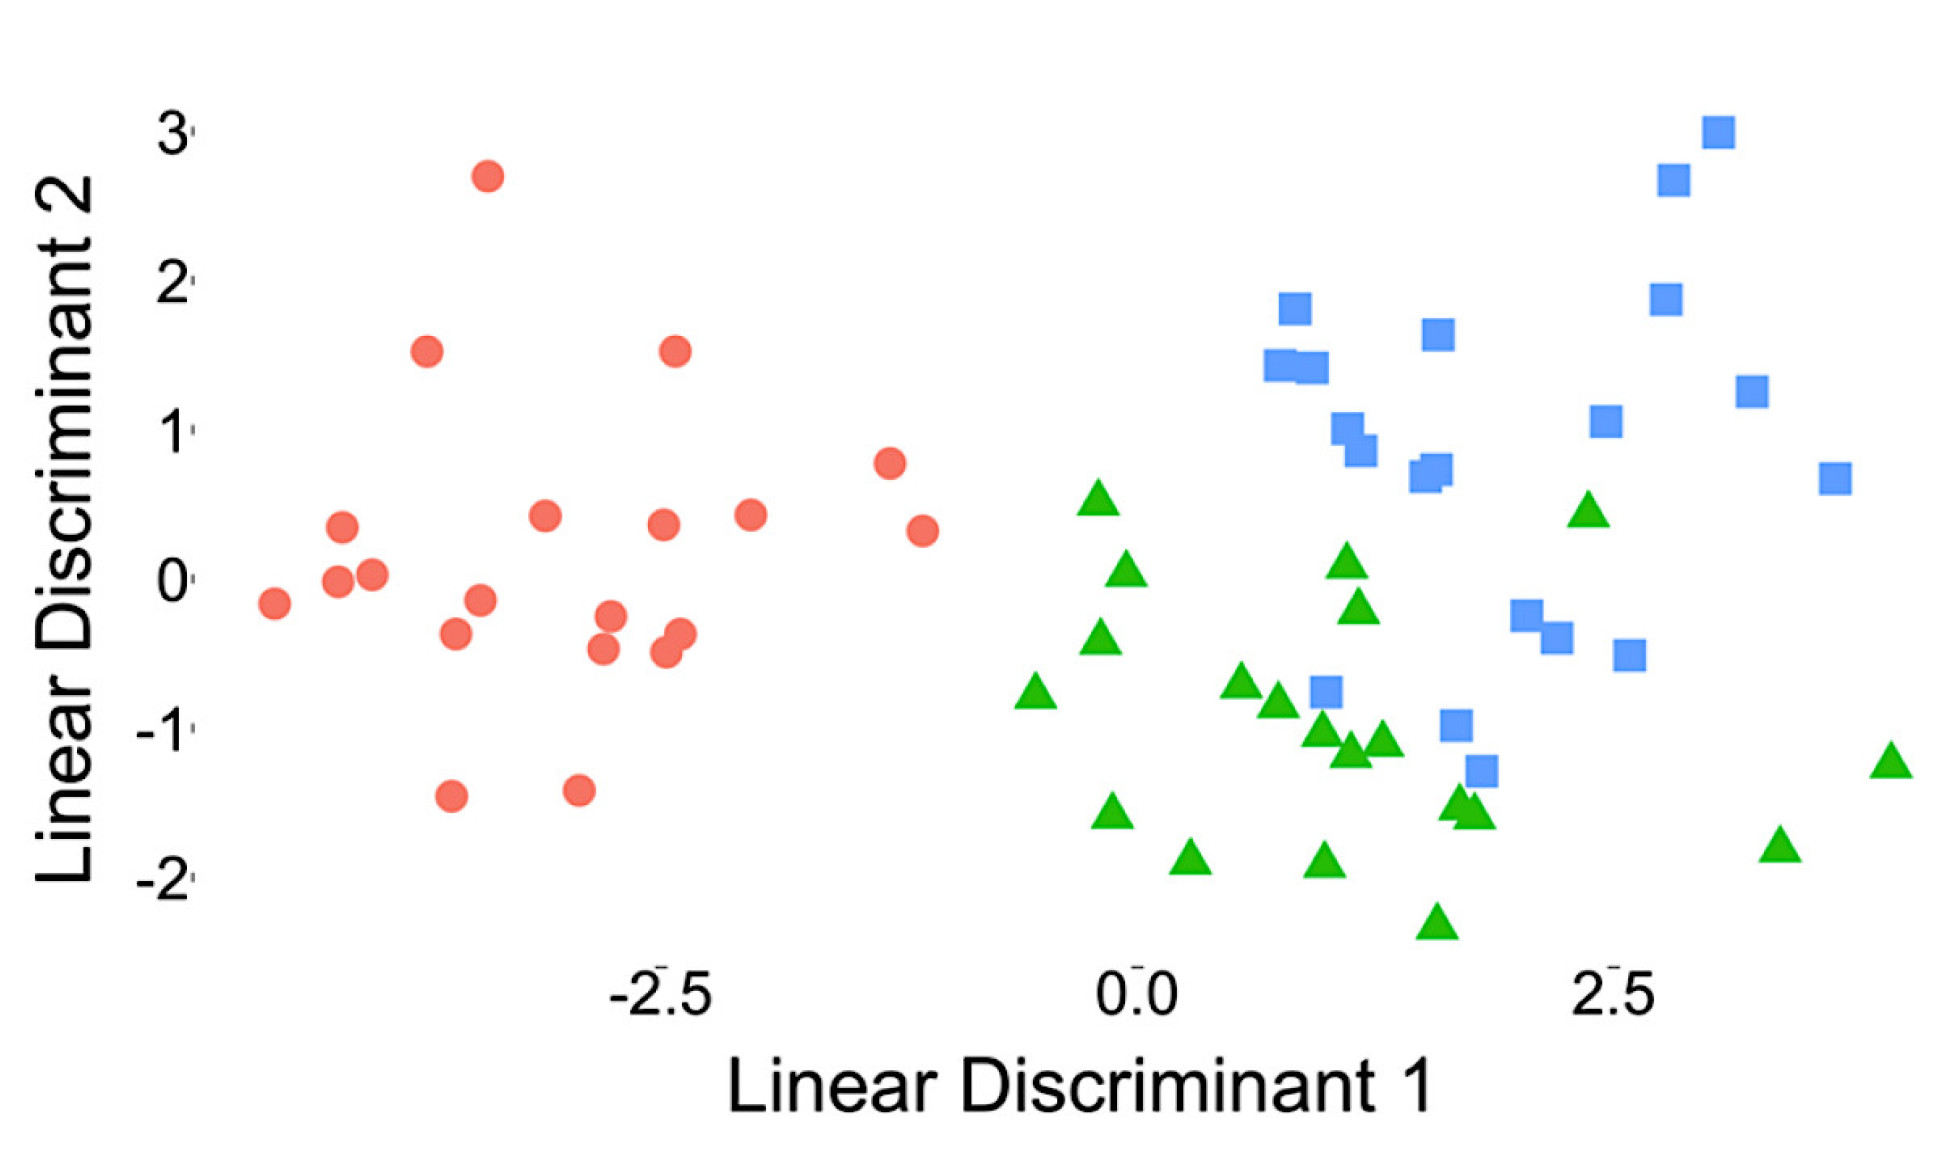 Bacterial species were identified and differentiated using machine learning-based analysis 